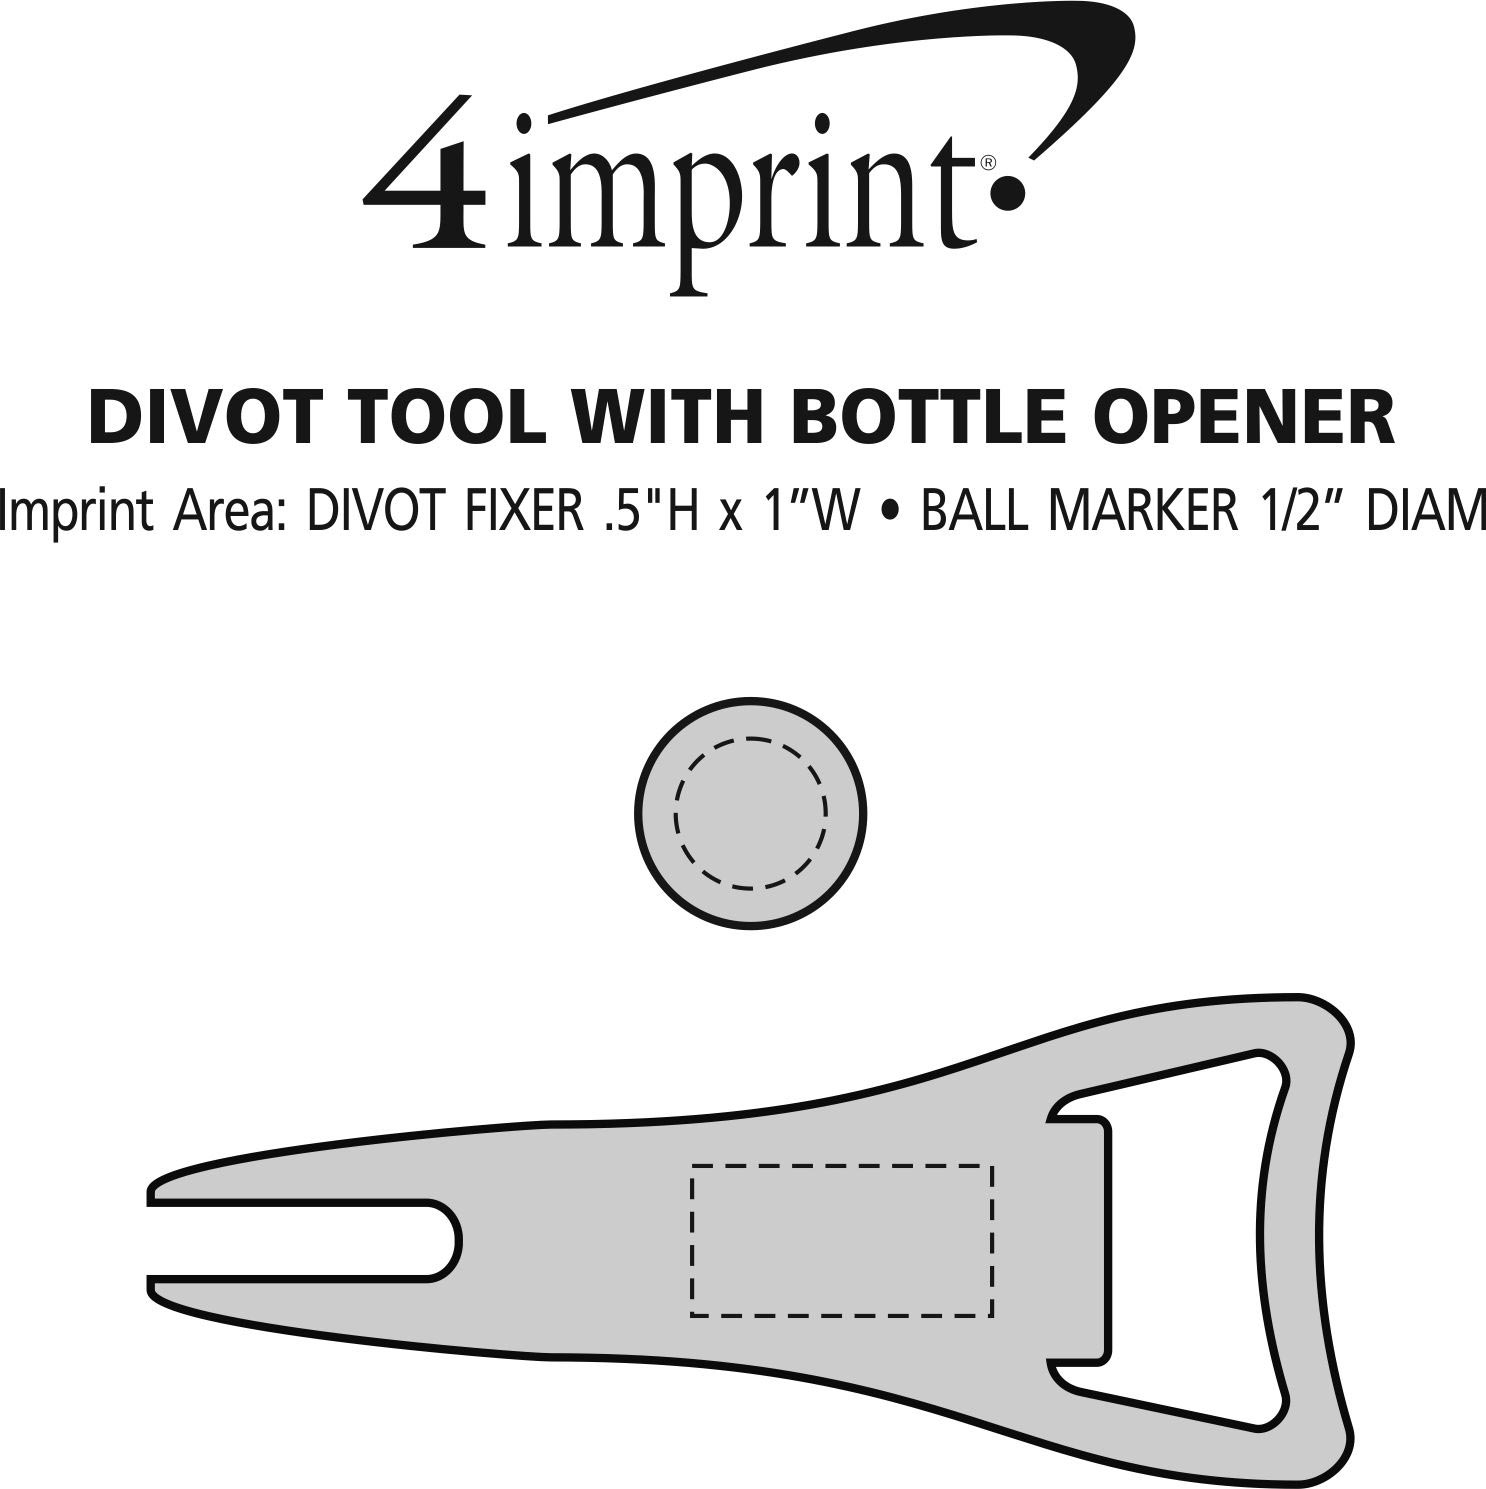 Imprint Area of Divot Tool with Bottle Opener